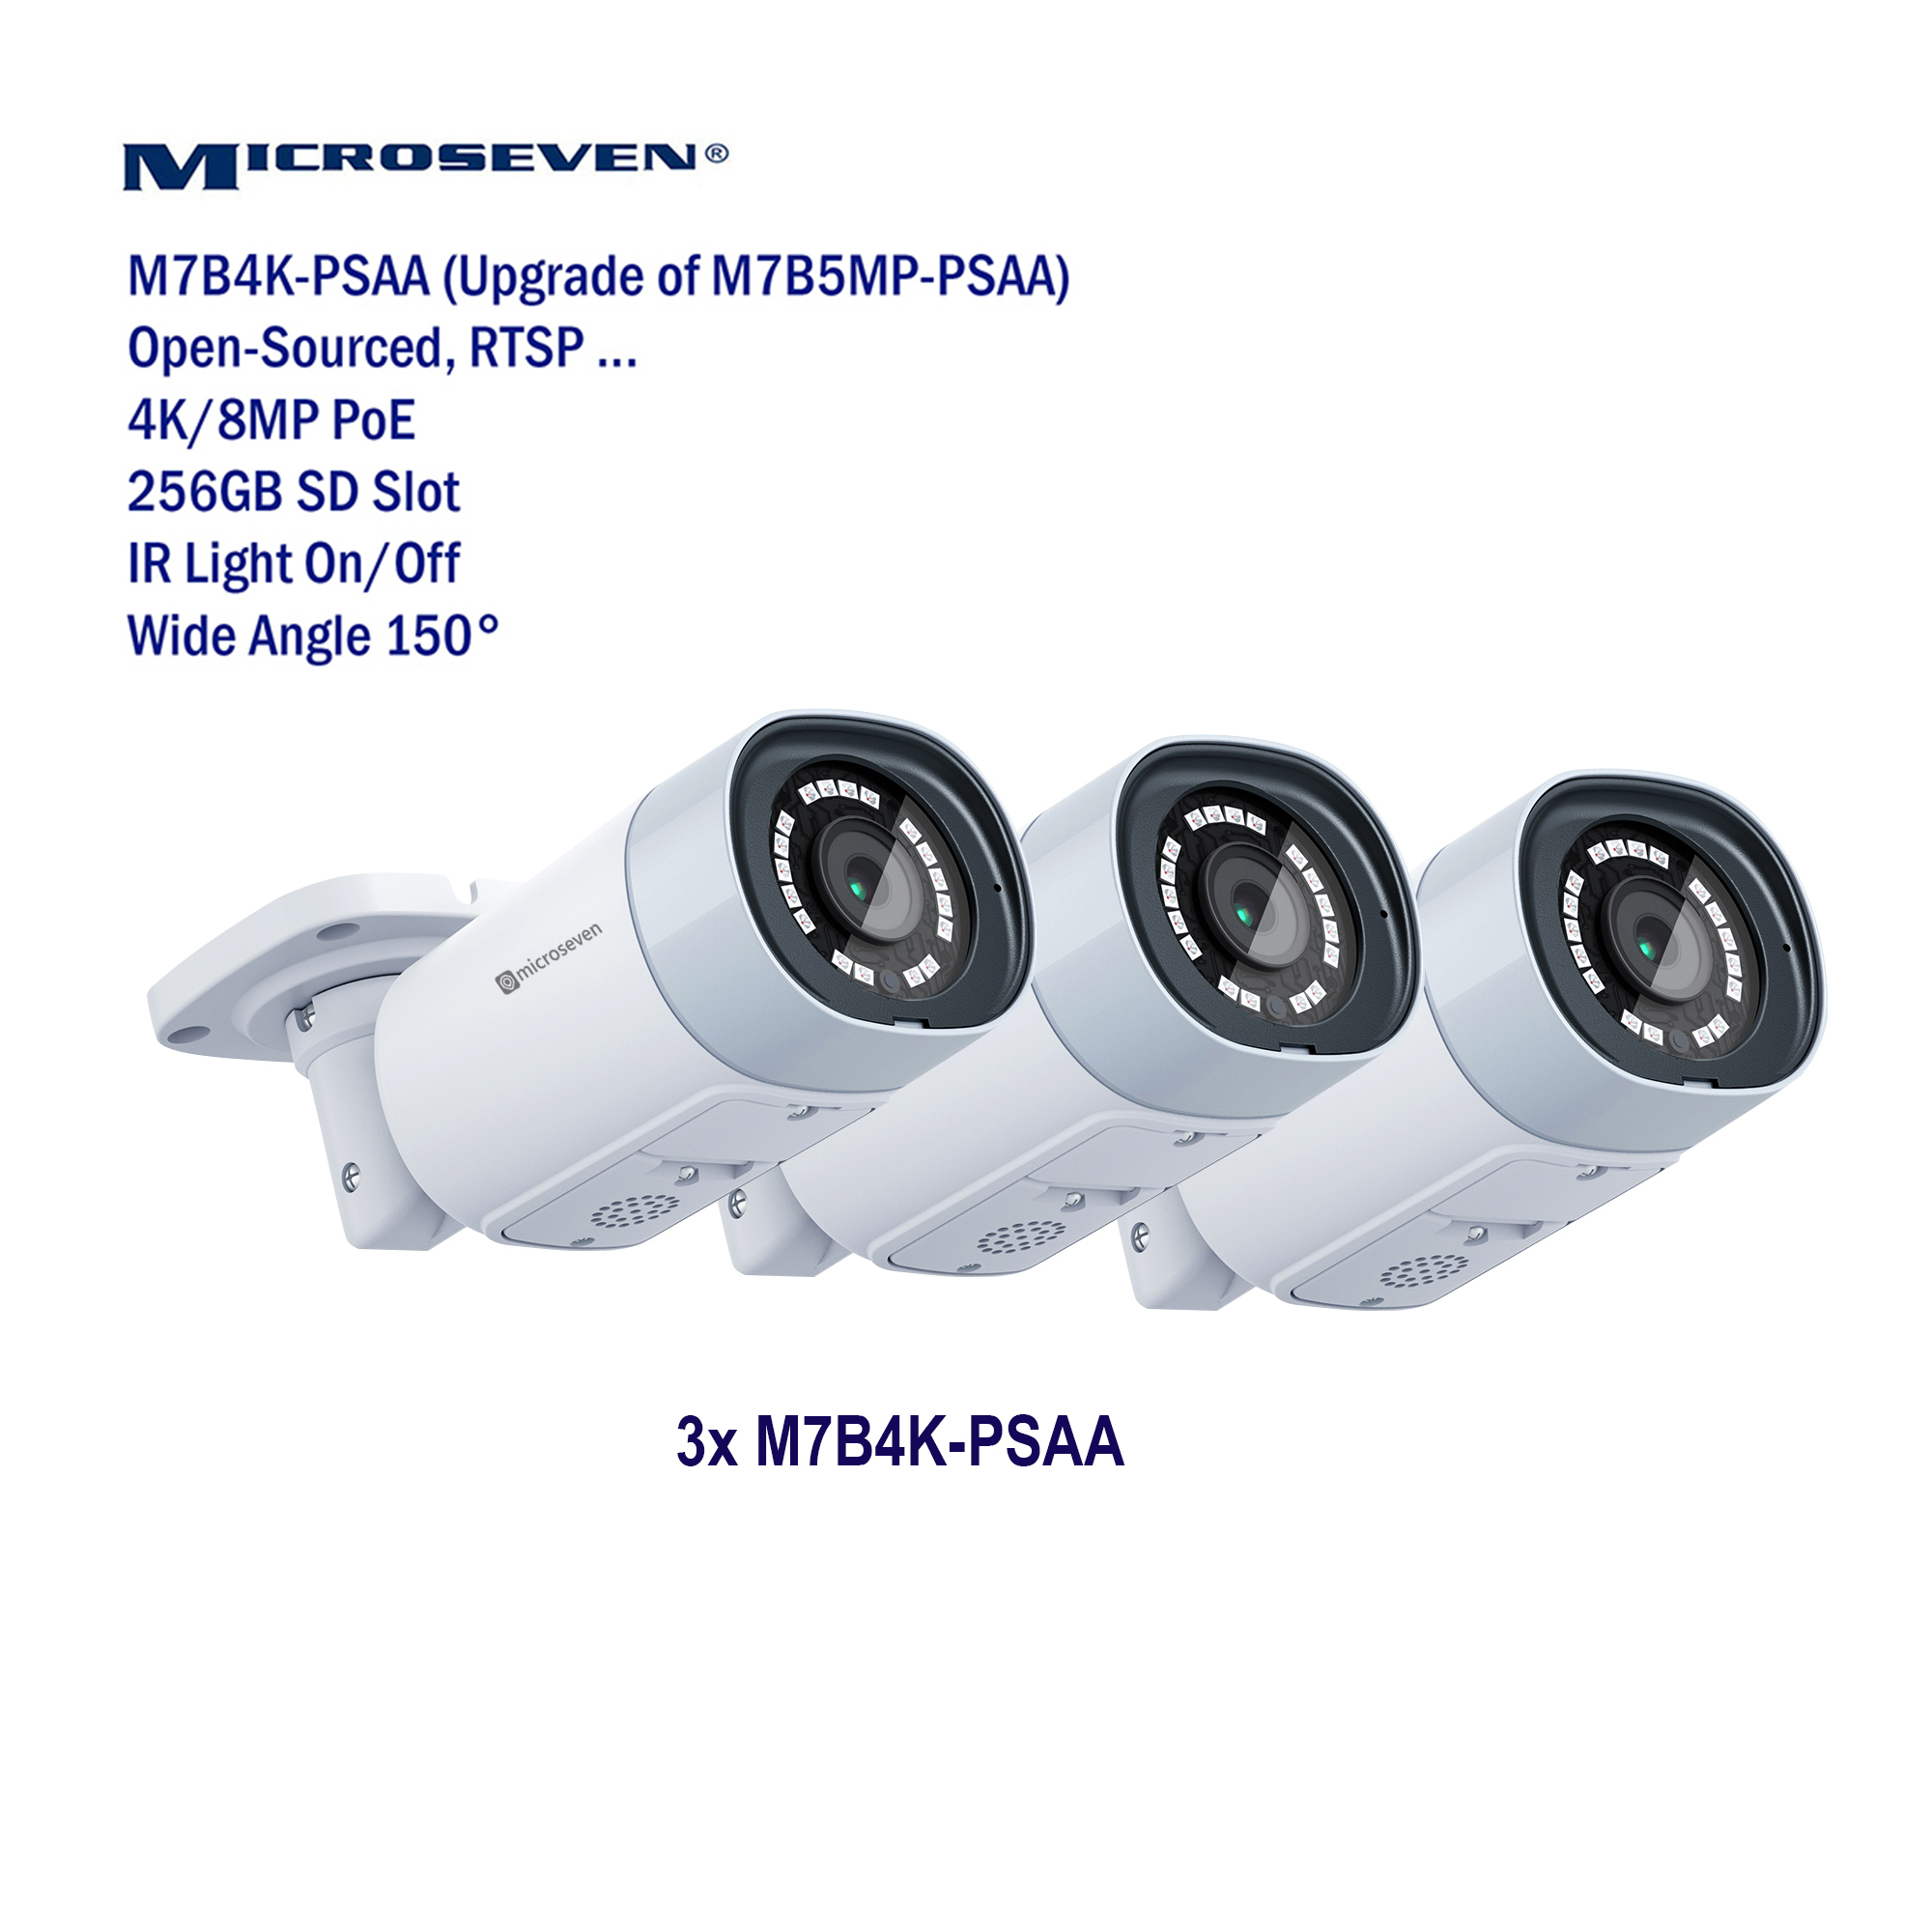 3x Microseven Open Source Ultra HD 4K/8MP(3840x2160) PoE SONY 1/2.8" Chipset CMOS 2.8mm 8MP Lens Ultra-Wide Angle, Two-Way Audio with Built-in Amplified Microphone and Speaker plug and Play ONVIF, IR Light (On/Off in the APP) Security Outdoor IP Camera, Human/Vehicle Detection, 256GB SD Slot, Day & Night, Web GUI & Apps, CMS (Camera Management System)M7 Cloud Storageand and Broadcasting on YouTube & Microseven